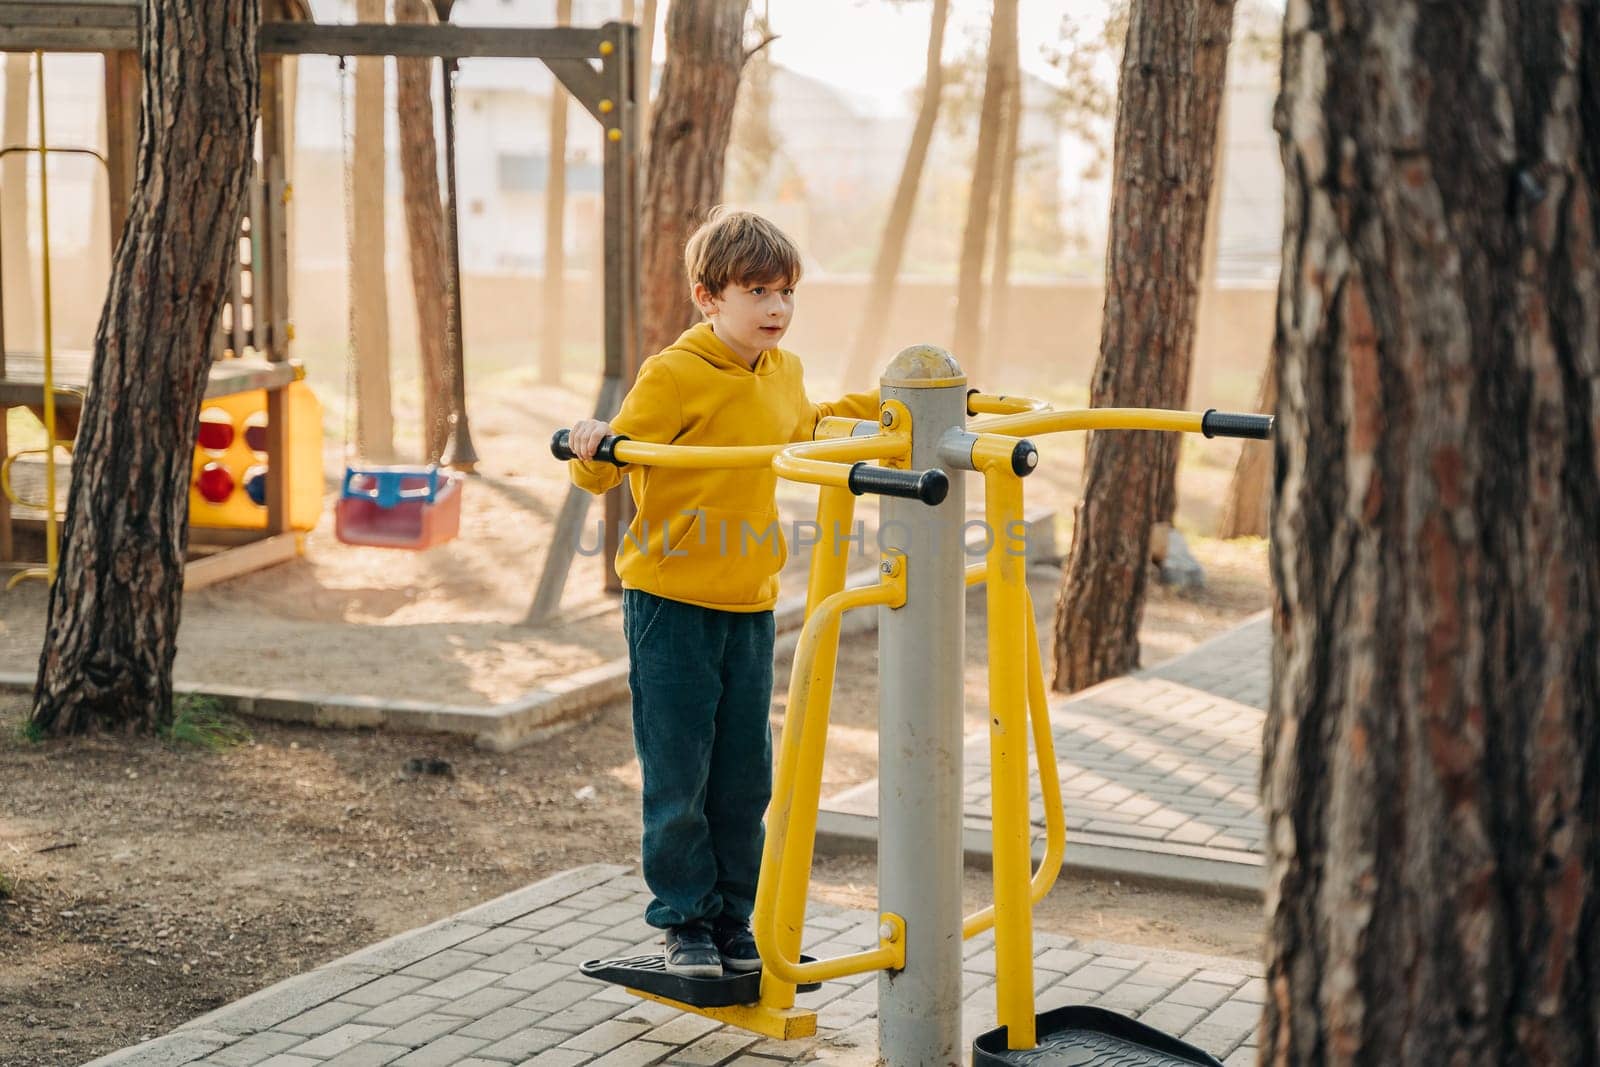 Elementary school boy using fitness exercise equipment in the public city park. Kid playing standing doing exercises on workout equipment in the forest park.